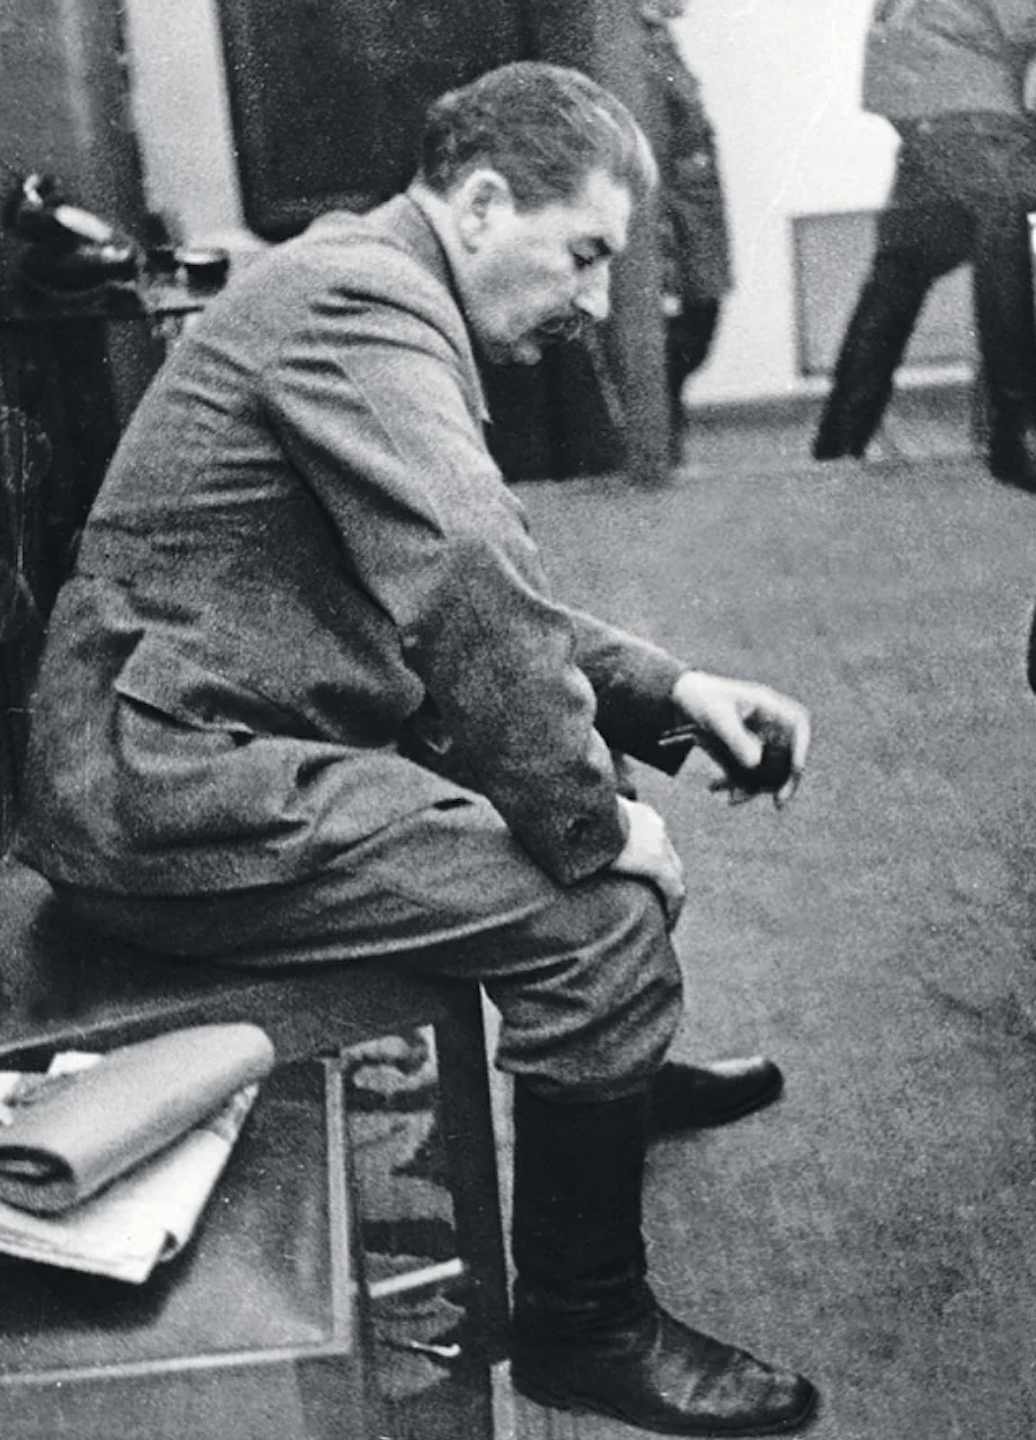 An unauthorized photo taken of Stalin inside of the Kremlin shows the very moment he was informed that Germany had begun their invasion of the Soviet Union. It was taken by Komsomolskaya Pravda, editor in chief. He was ordered to destroy it, but instead saved it. June 22, 1941.